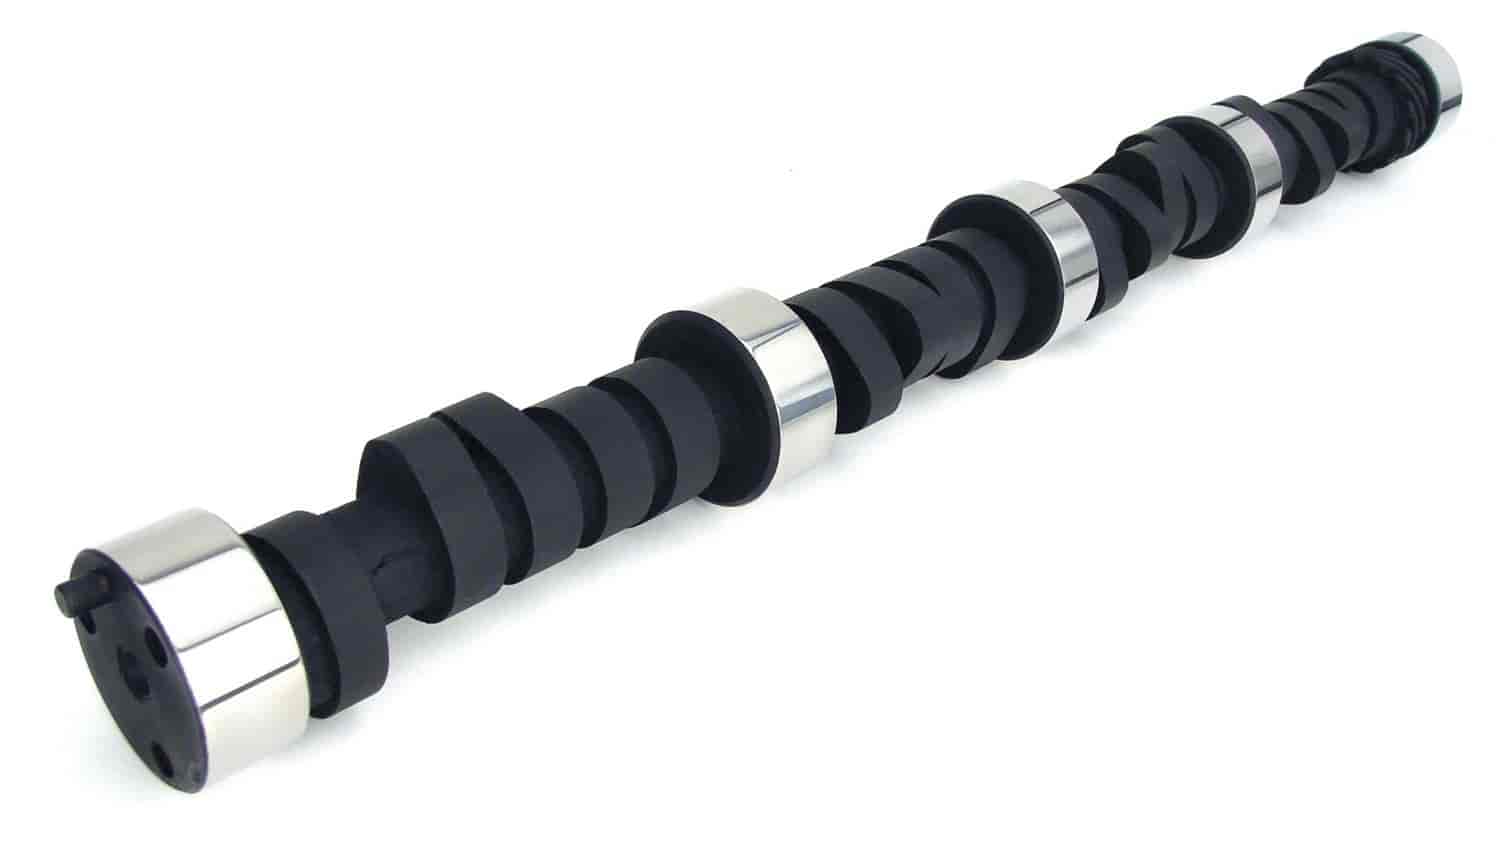 Thumpr Hydraulic Flat Tappet Camshaft Lift .510"/.495" Duration 287/305 RPM Range 2000 to 5900